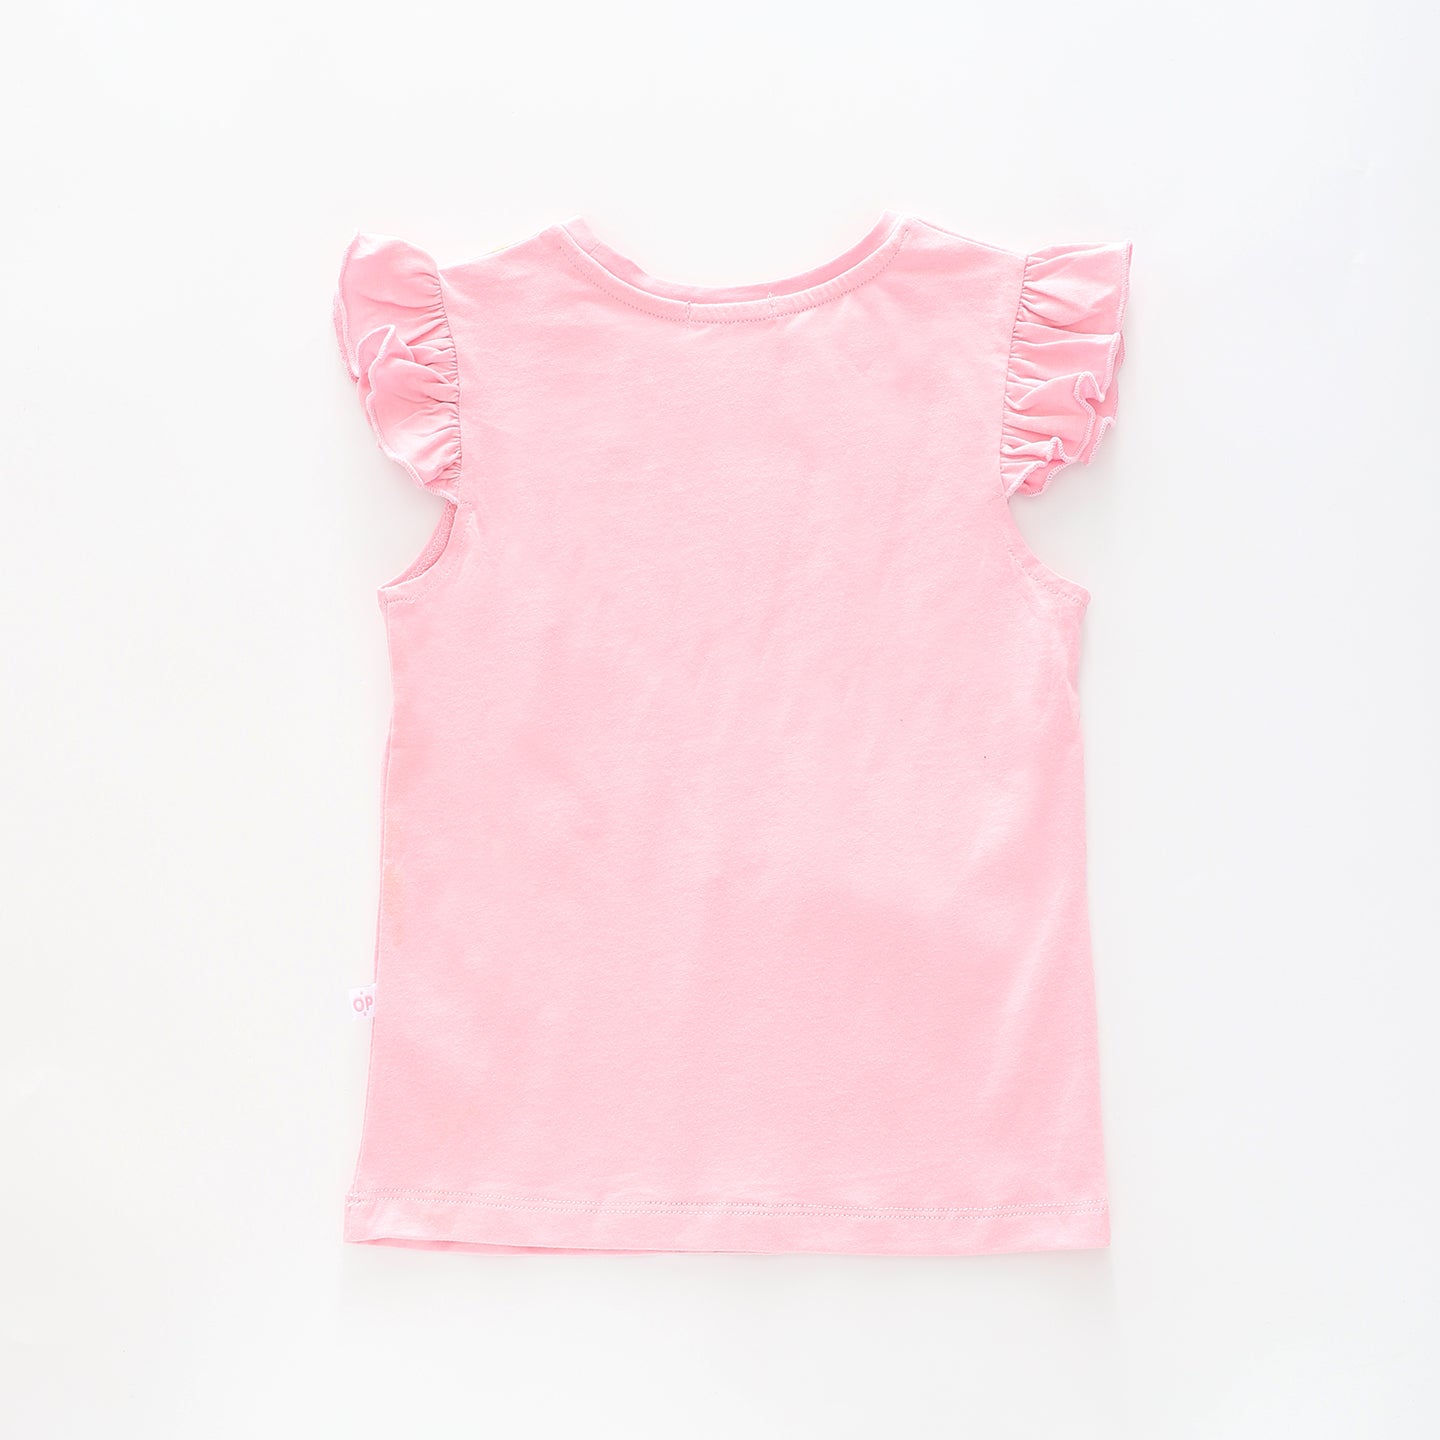 Girl's Baby Pink 'With Love' Perfume T-Shirt